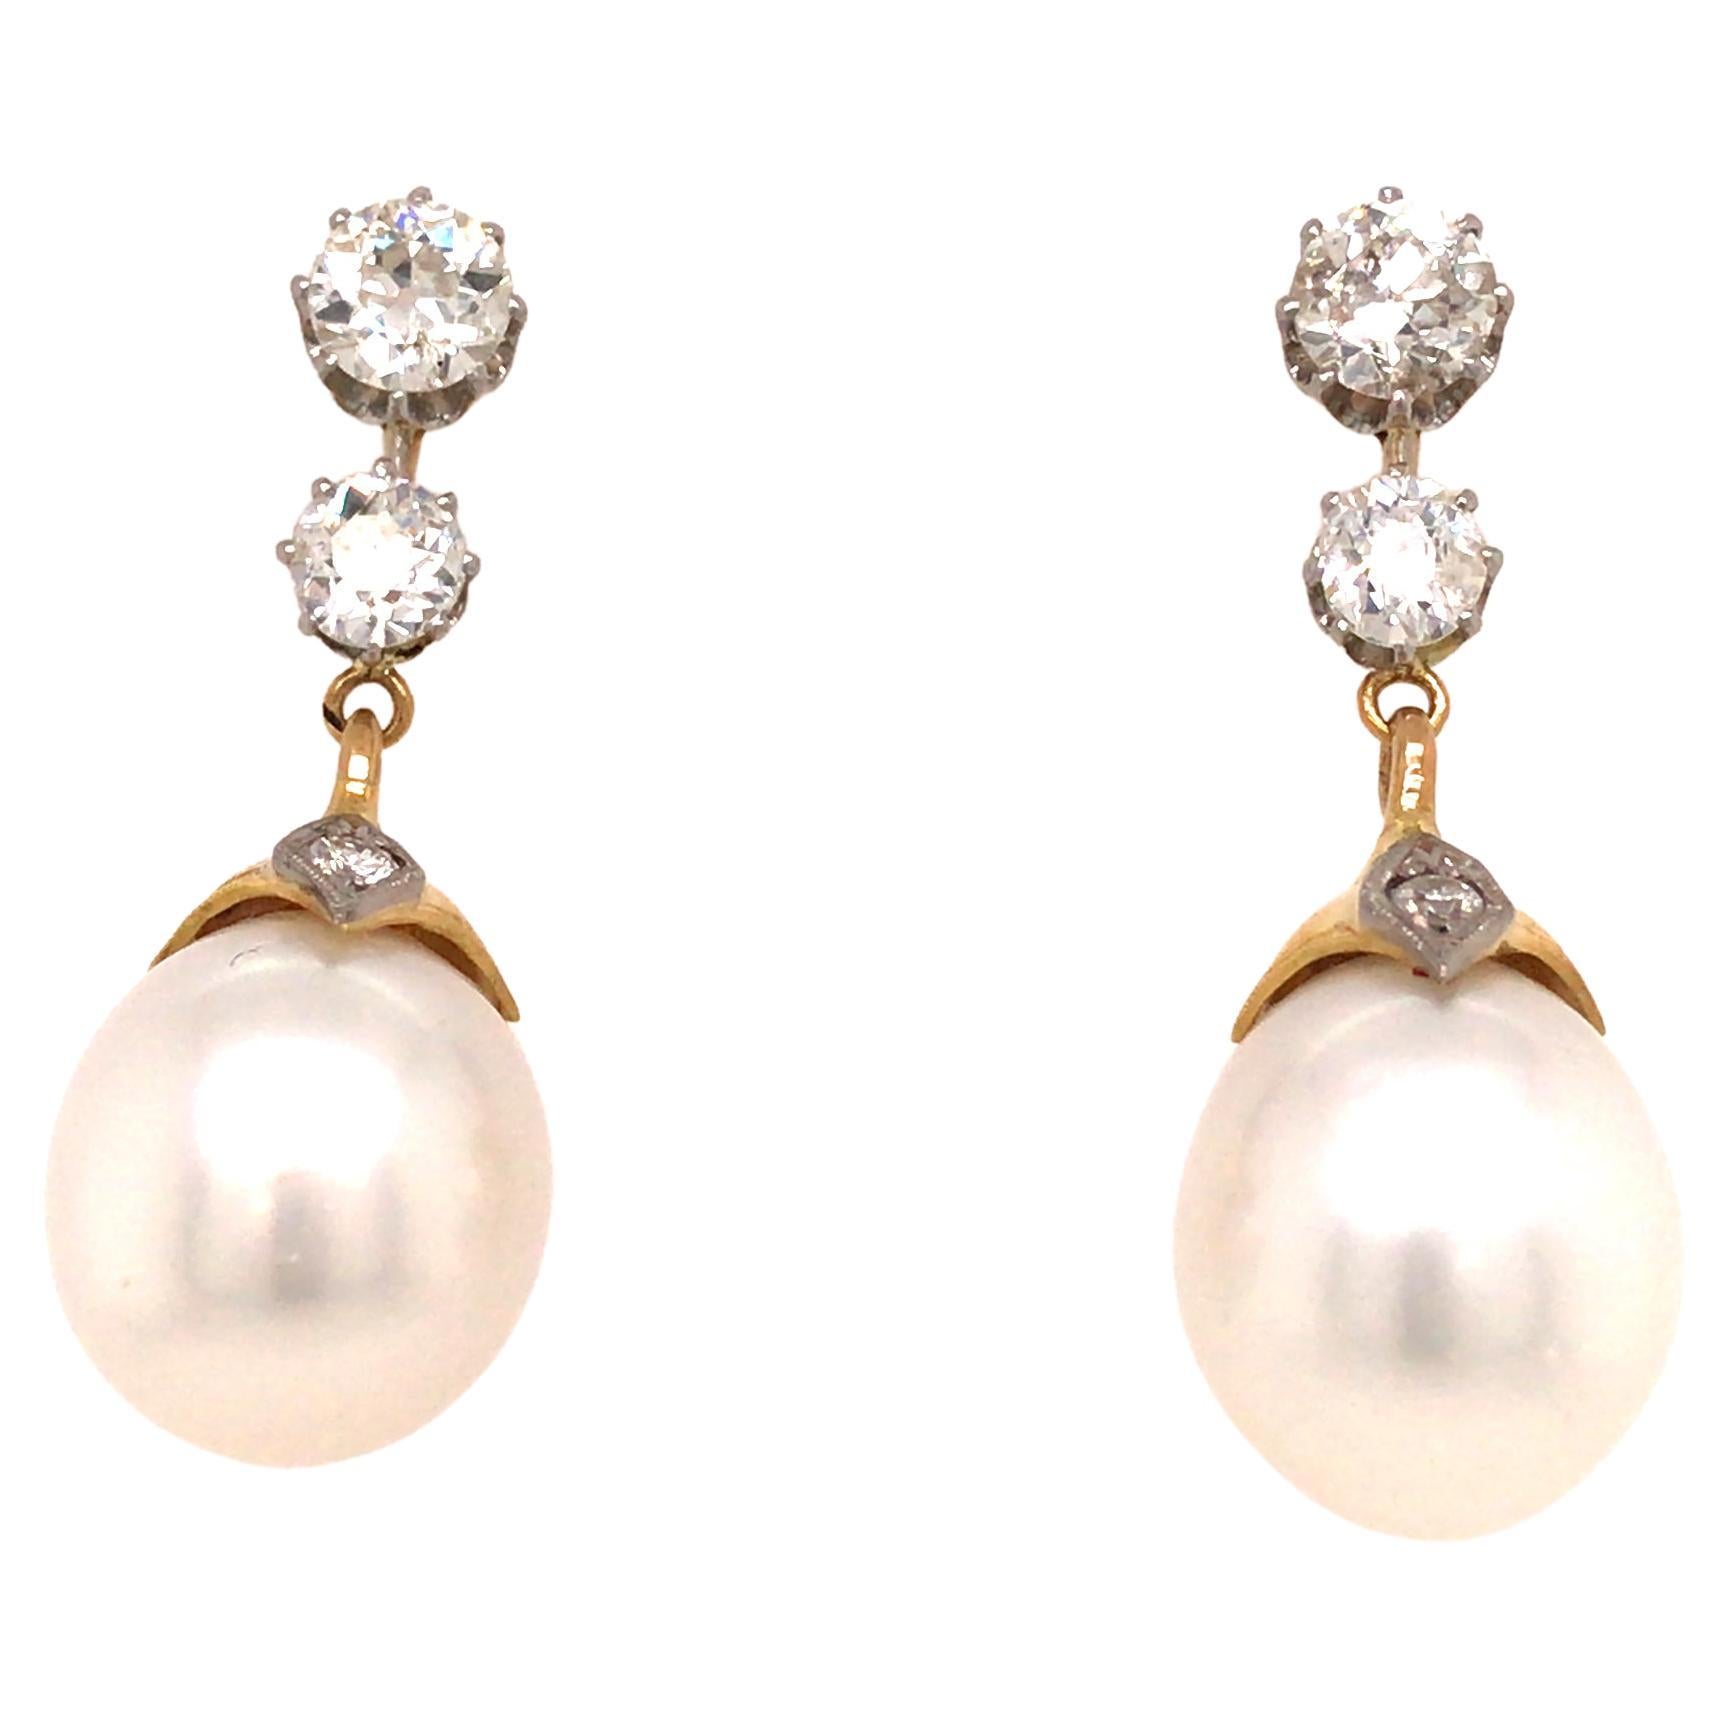 Platinum and 18K Yellow Gold Vintage Diamond and Pearl Drop Earrings